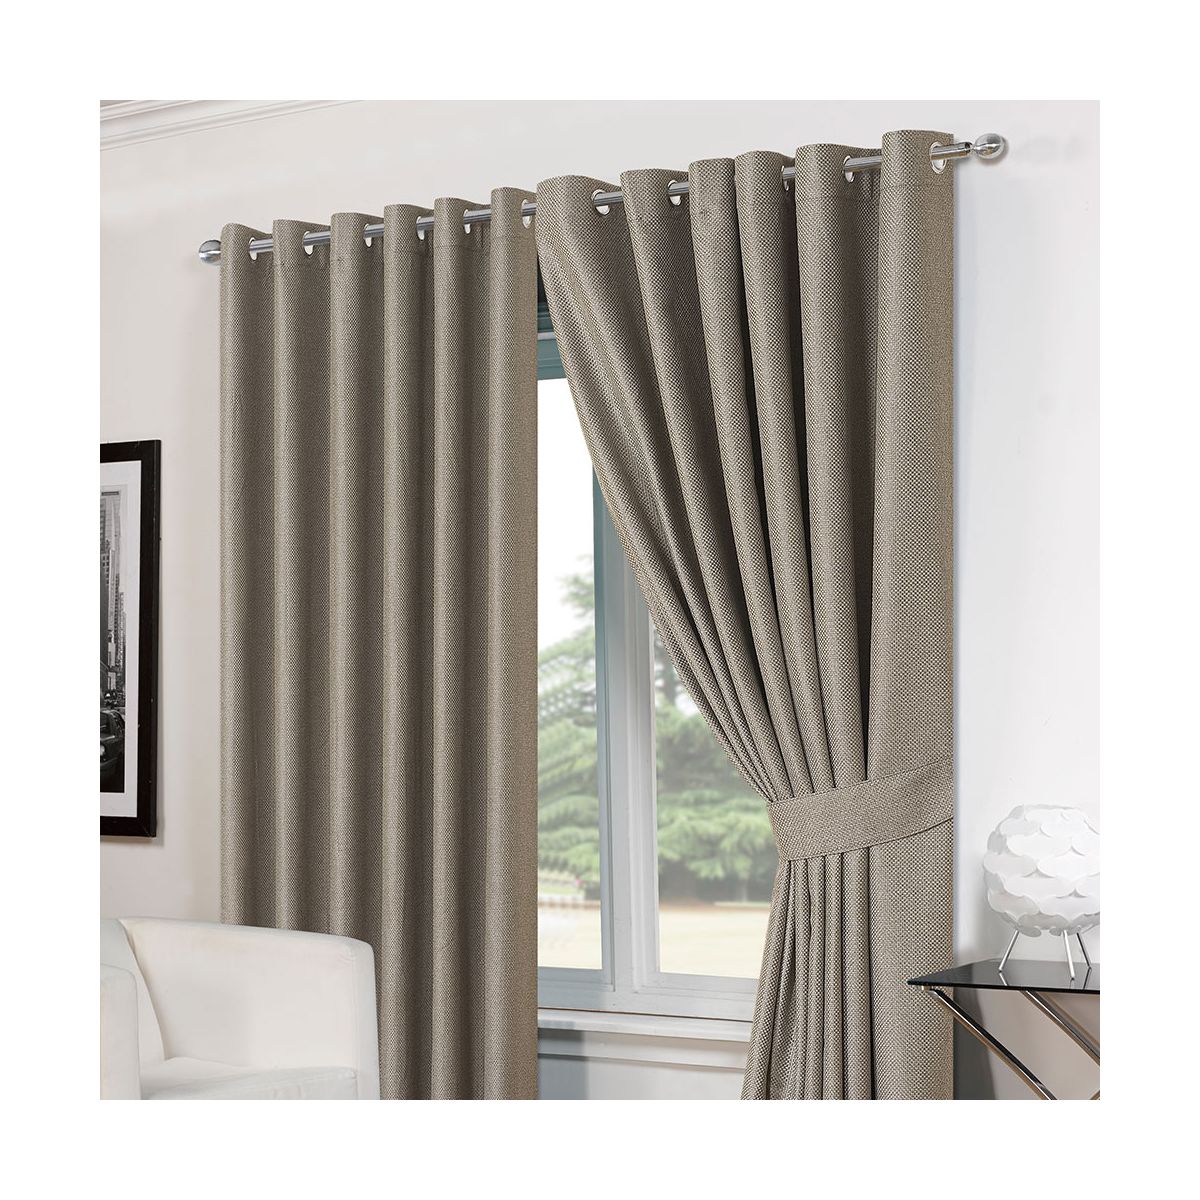 Luxury Basket Weave Lined  Eyelet Curtains with Tiebacks - Silver Grey 46"x54"